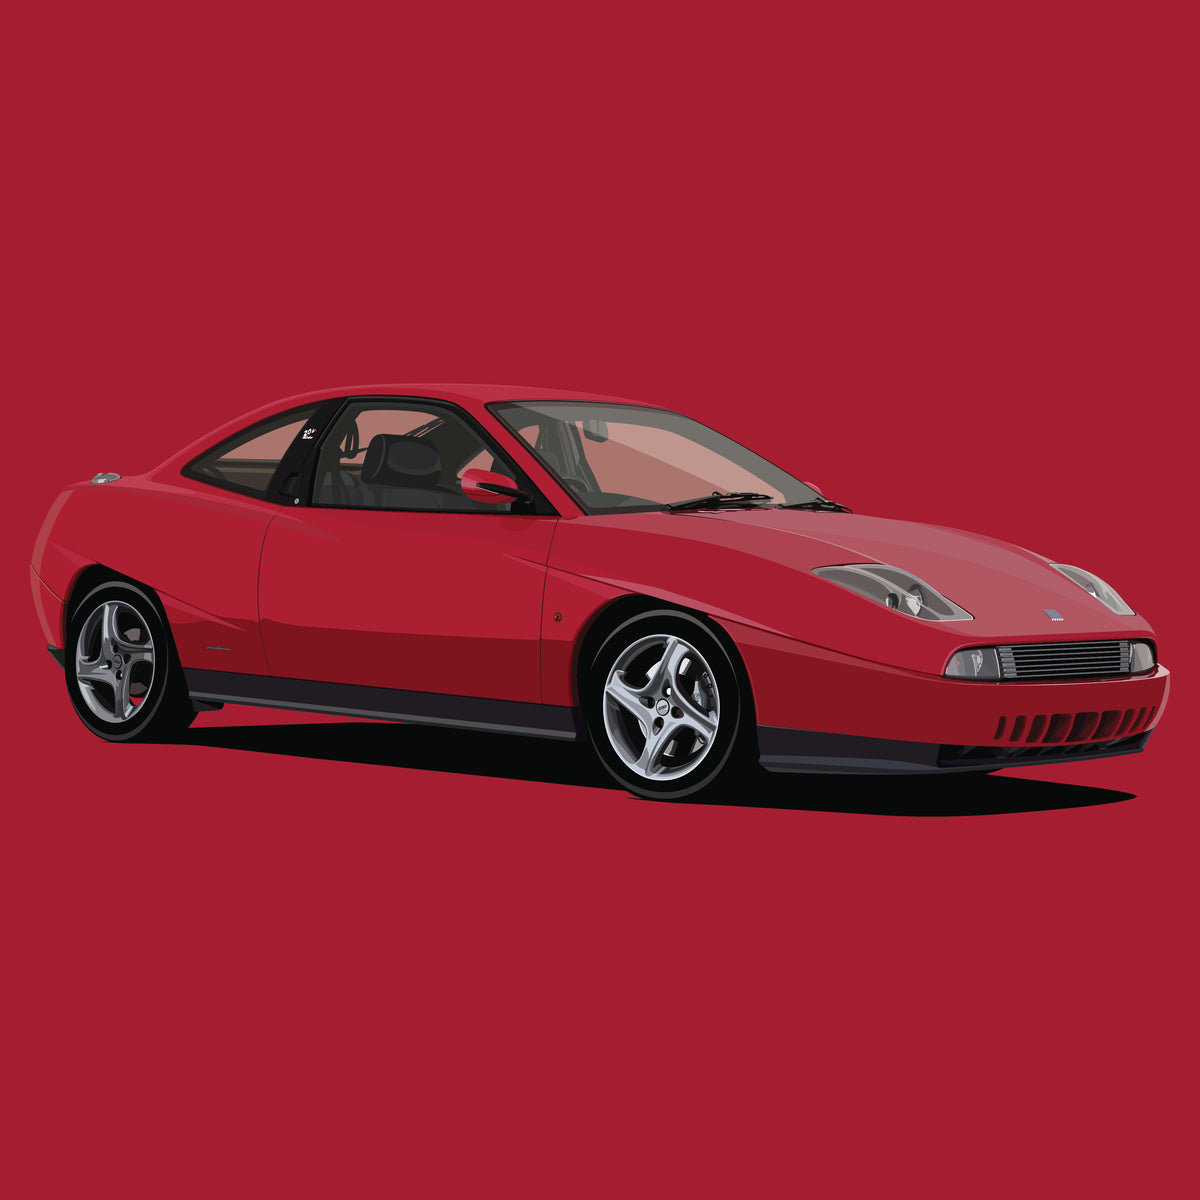 Classic Car Posters of Fiat Coupe – mpecautoillustration